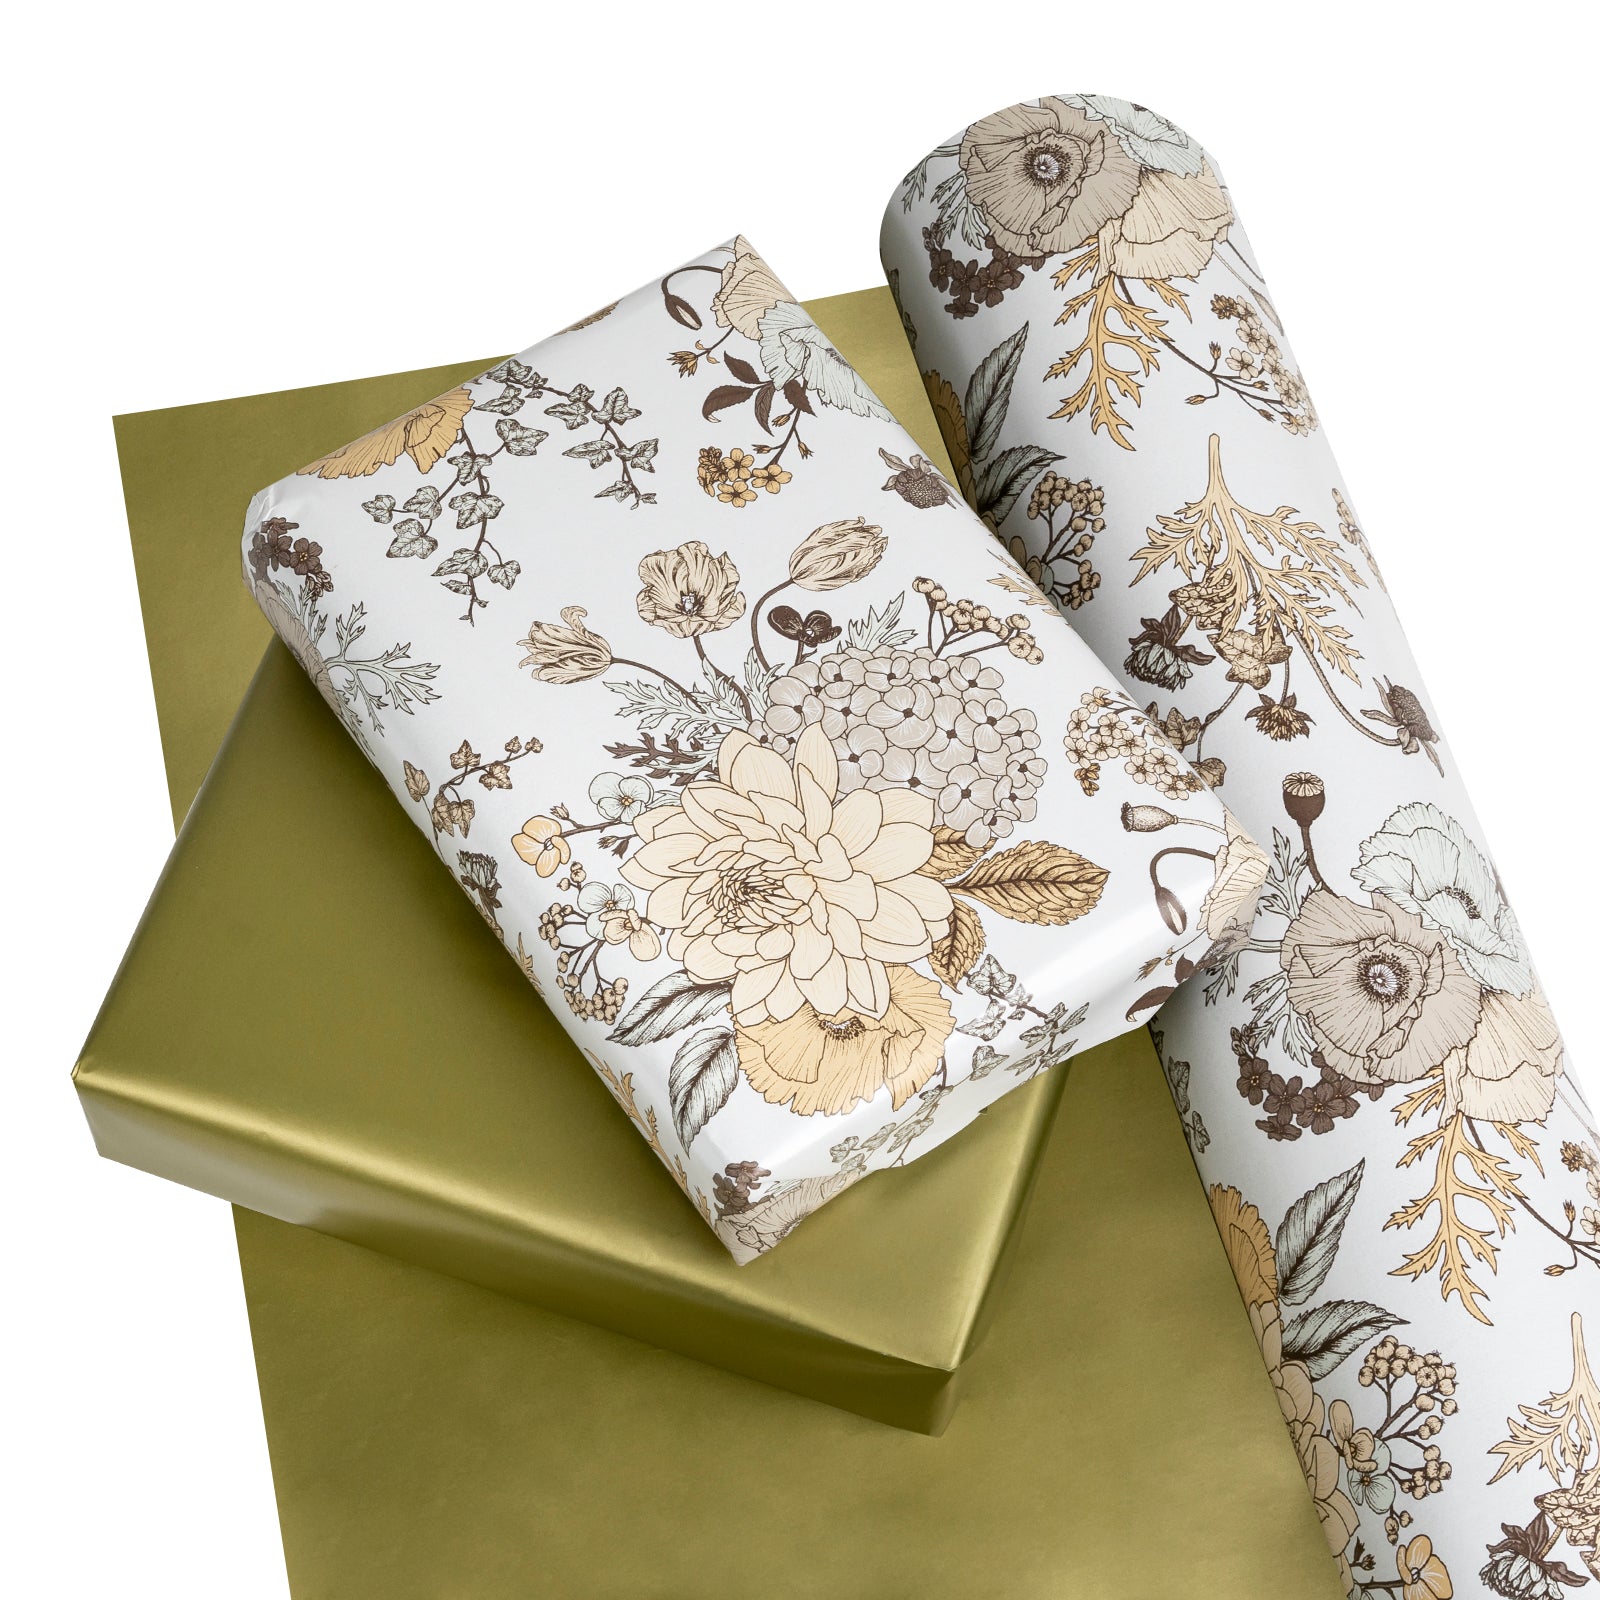 Sketch Floral Wrapping Paper Glossy White with Gold Color Jumbo Roll Wholesale